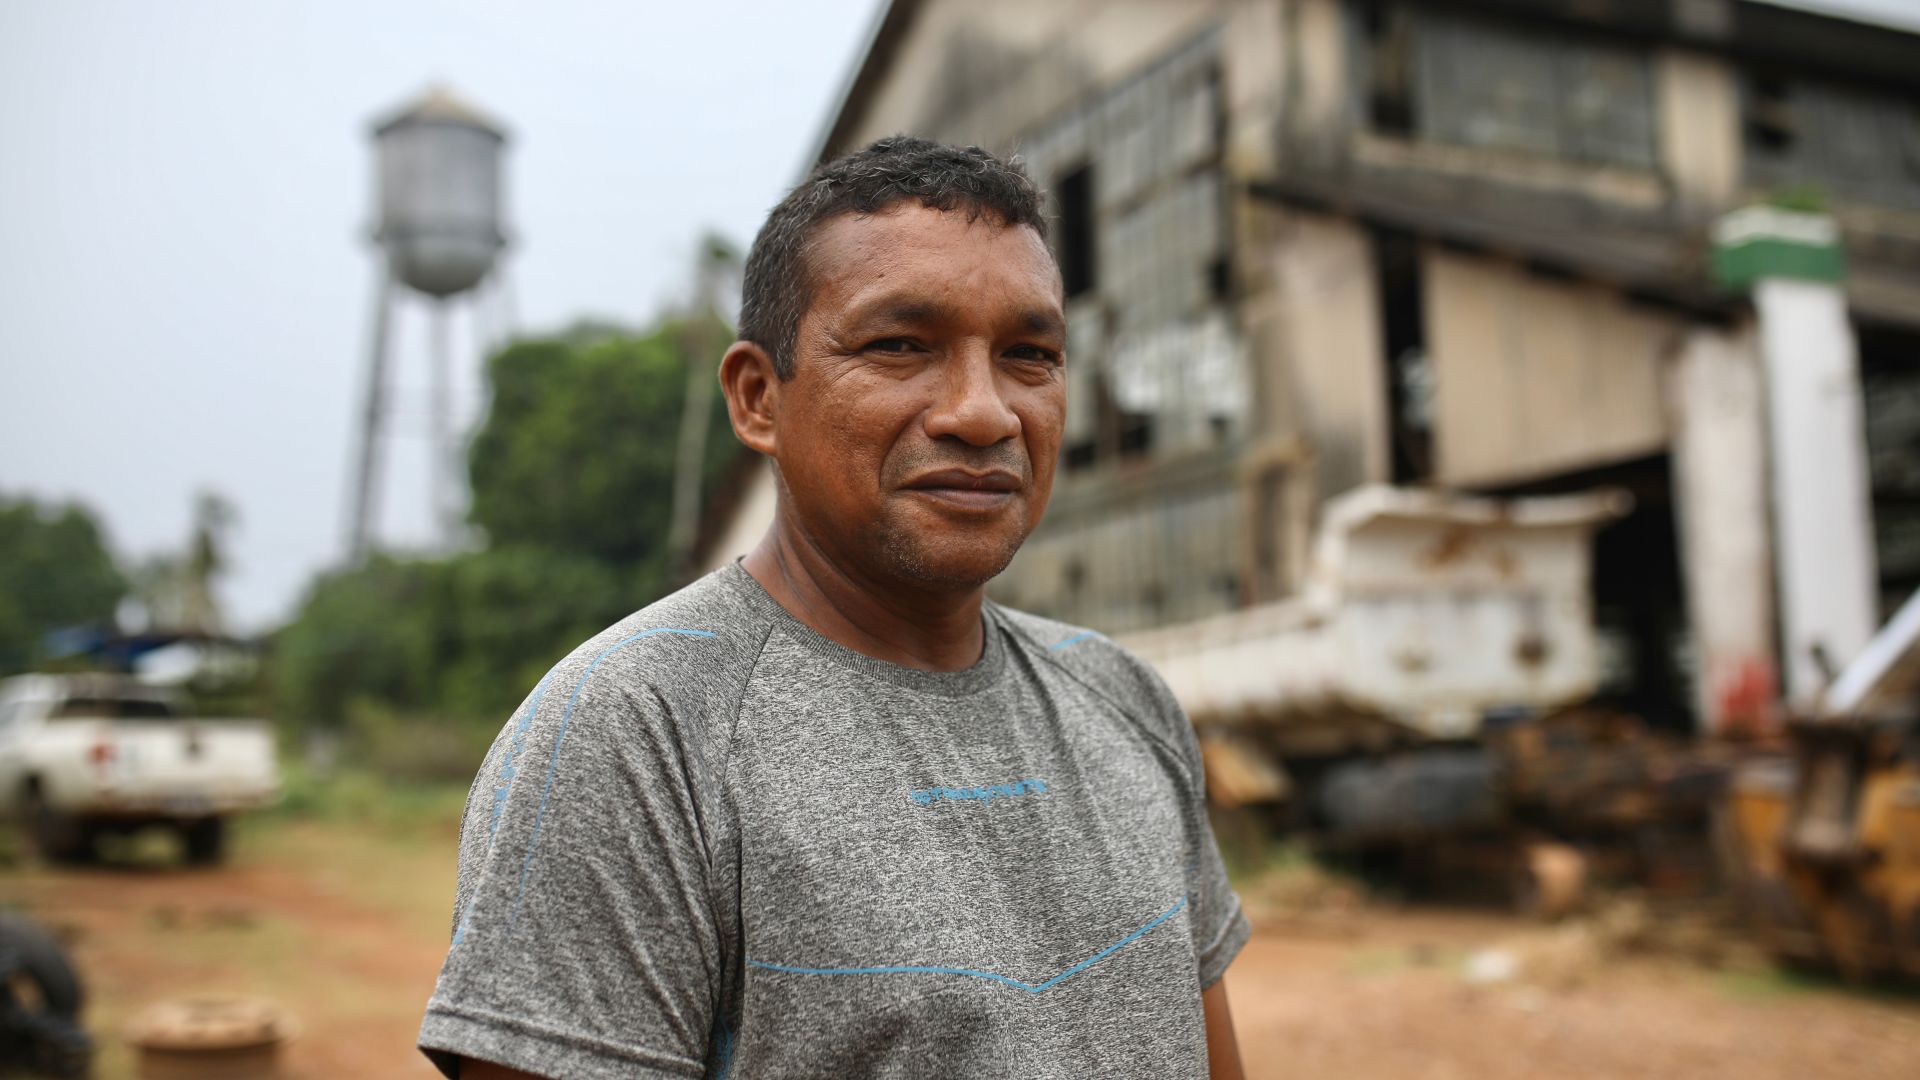 A man in a grey T-shirt stands in front of the abandoned warehouses at Fordlandia, an industrial town in the Amazon. A water tower is also visible behind him.